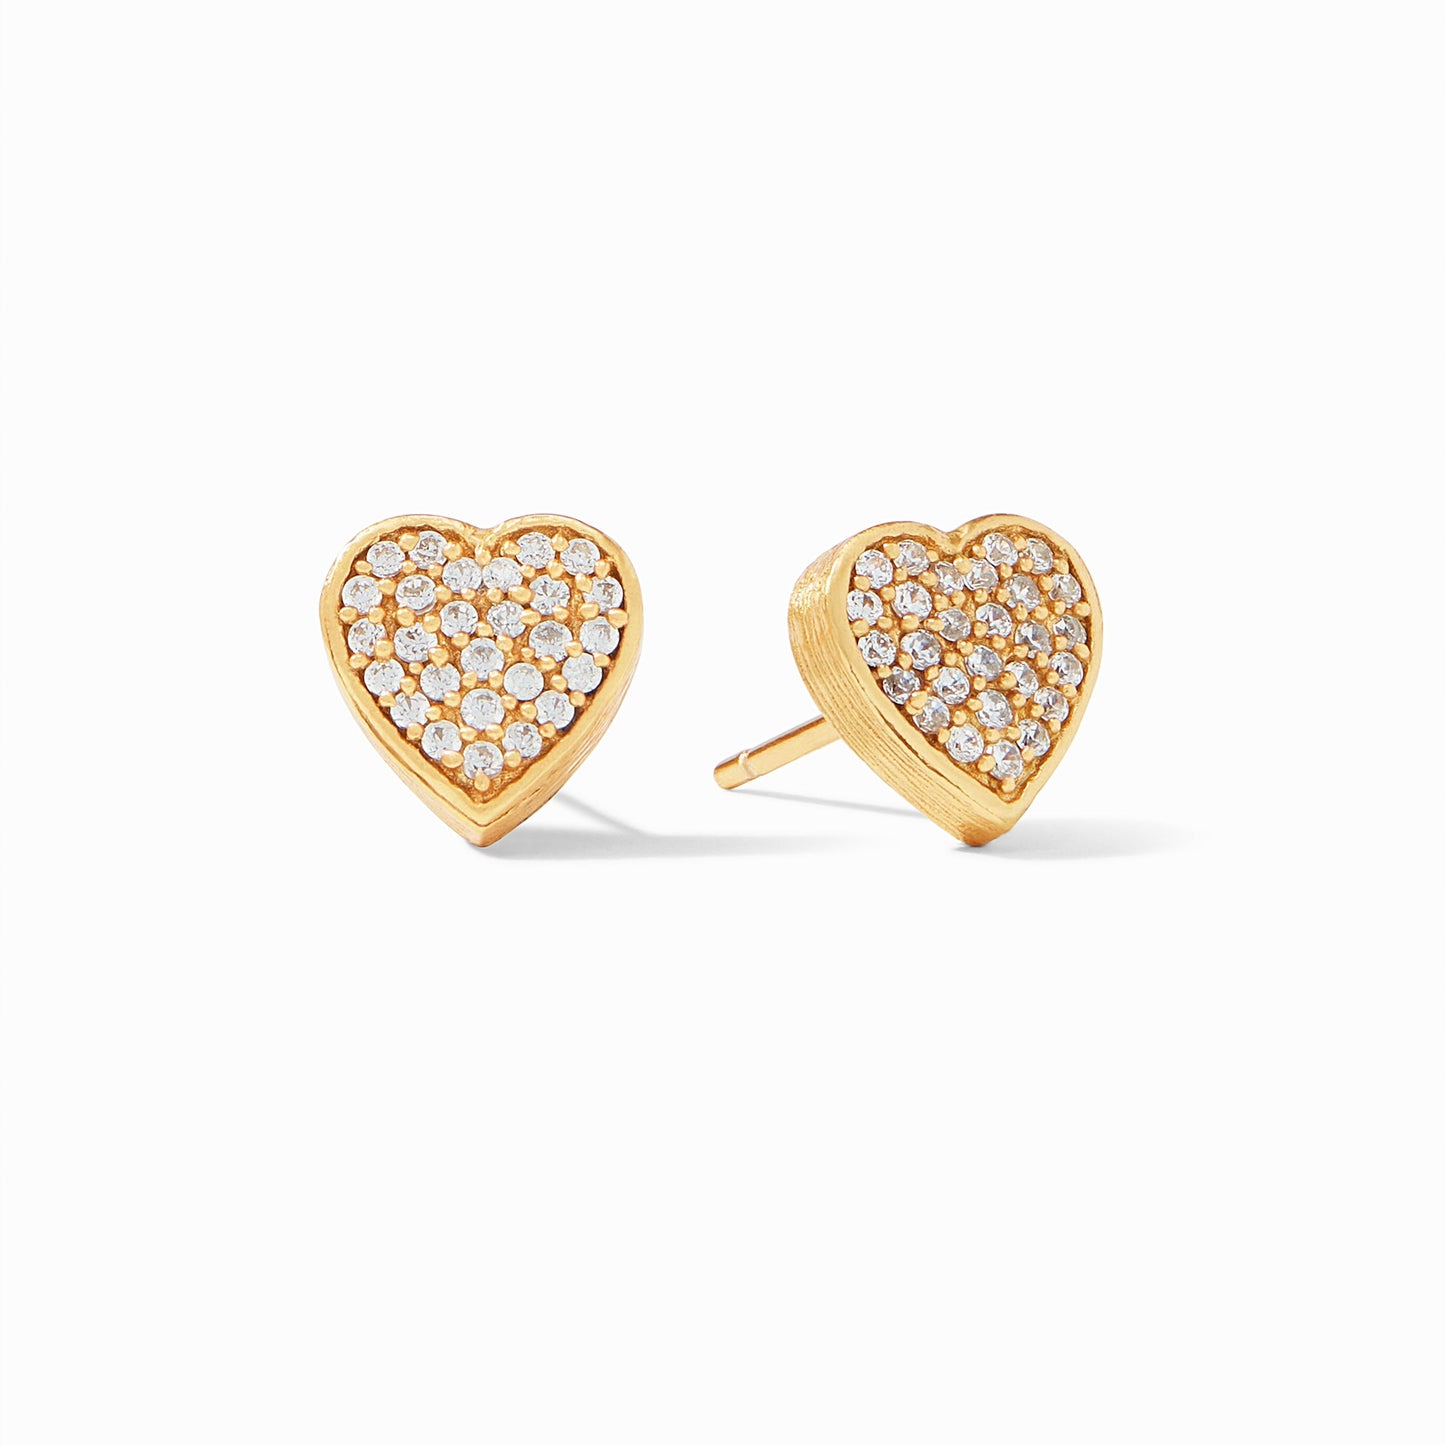 Julie Vos Julie Vos - Heart Pave Stud Earring Gold - CZs available at The Good Life Boutique